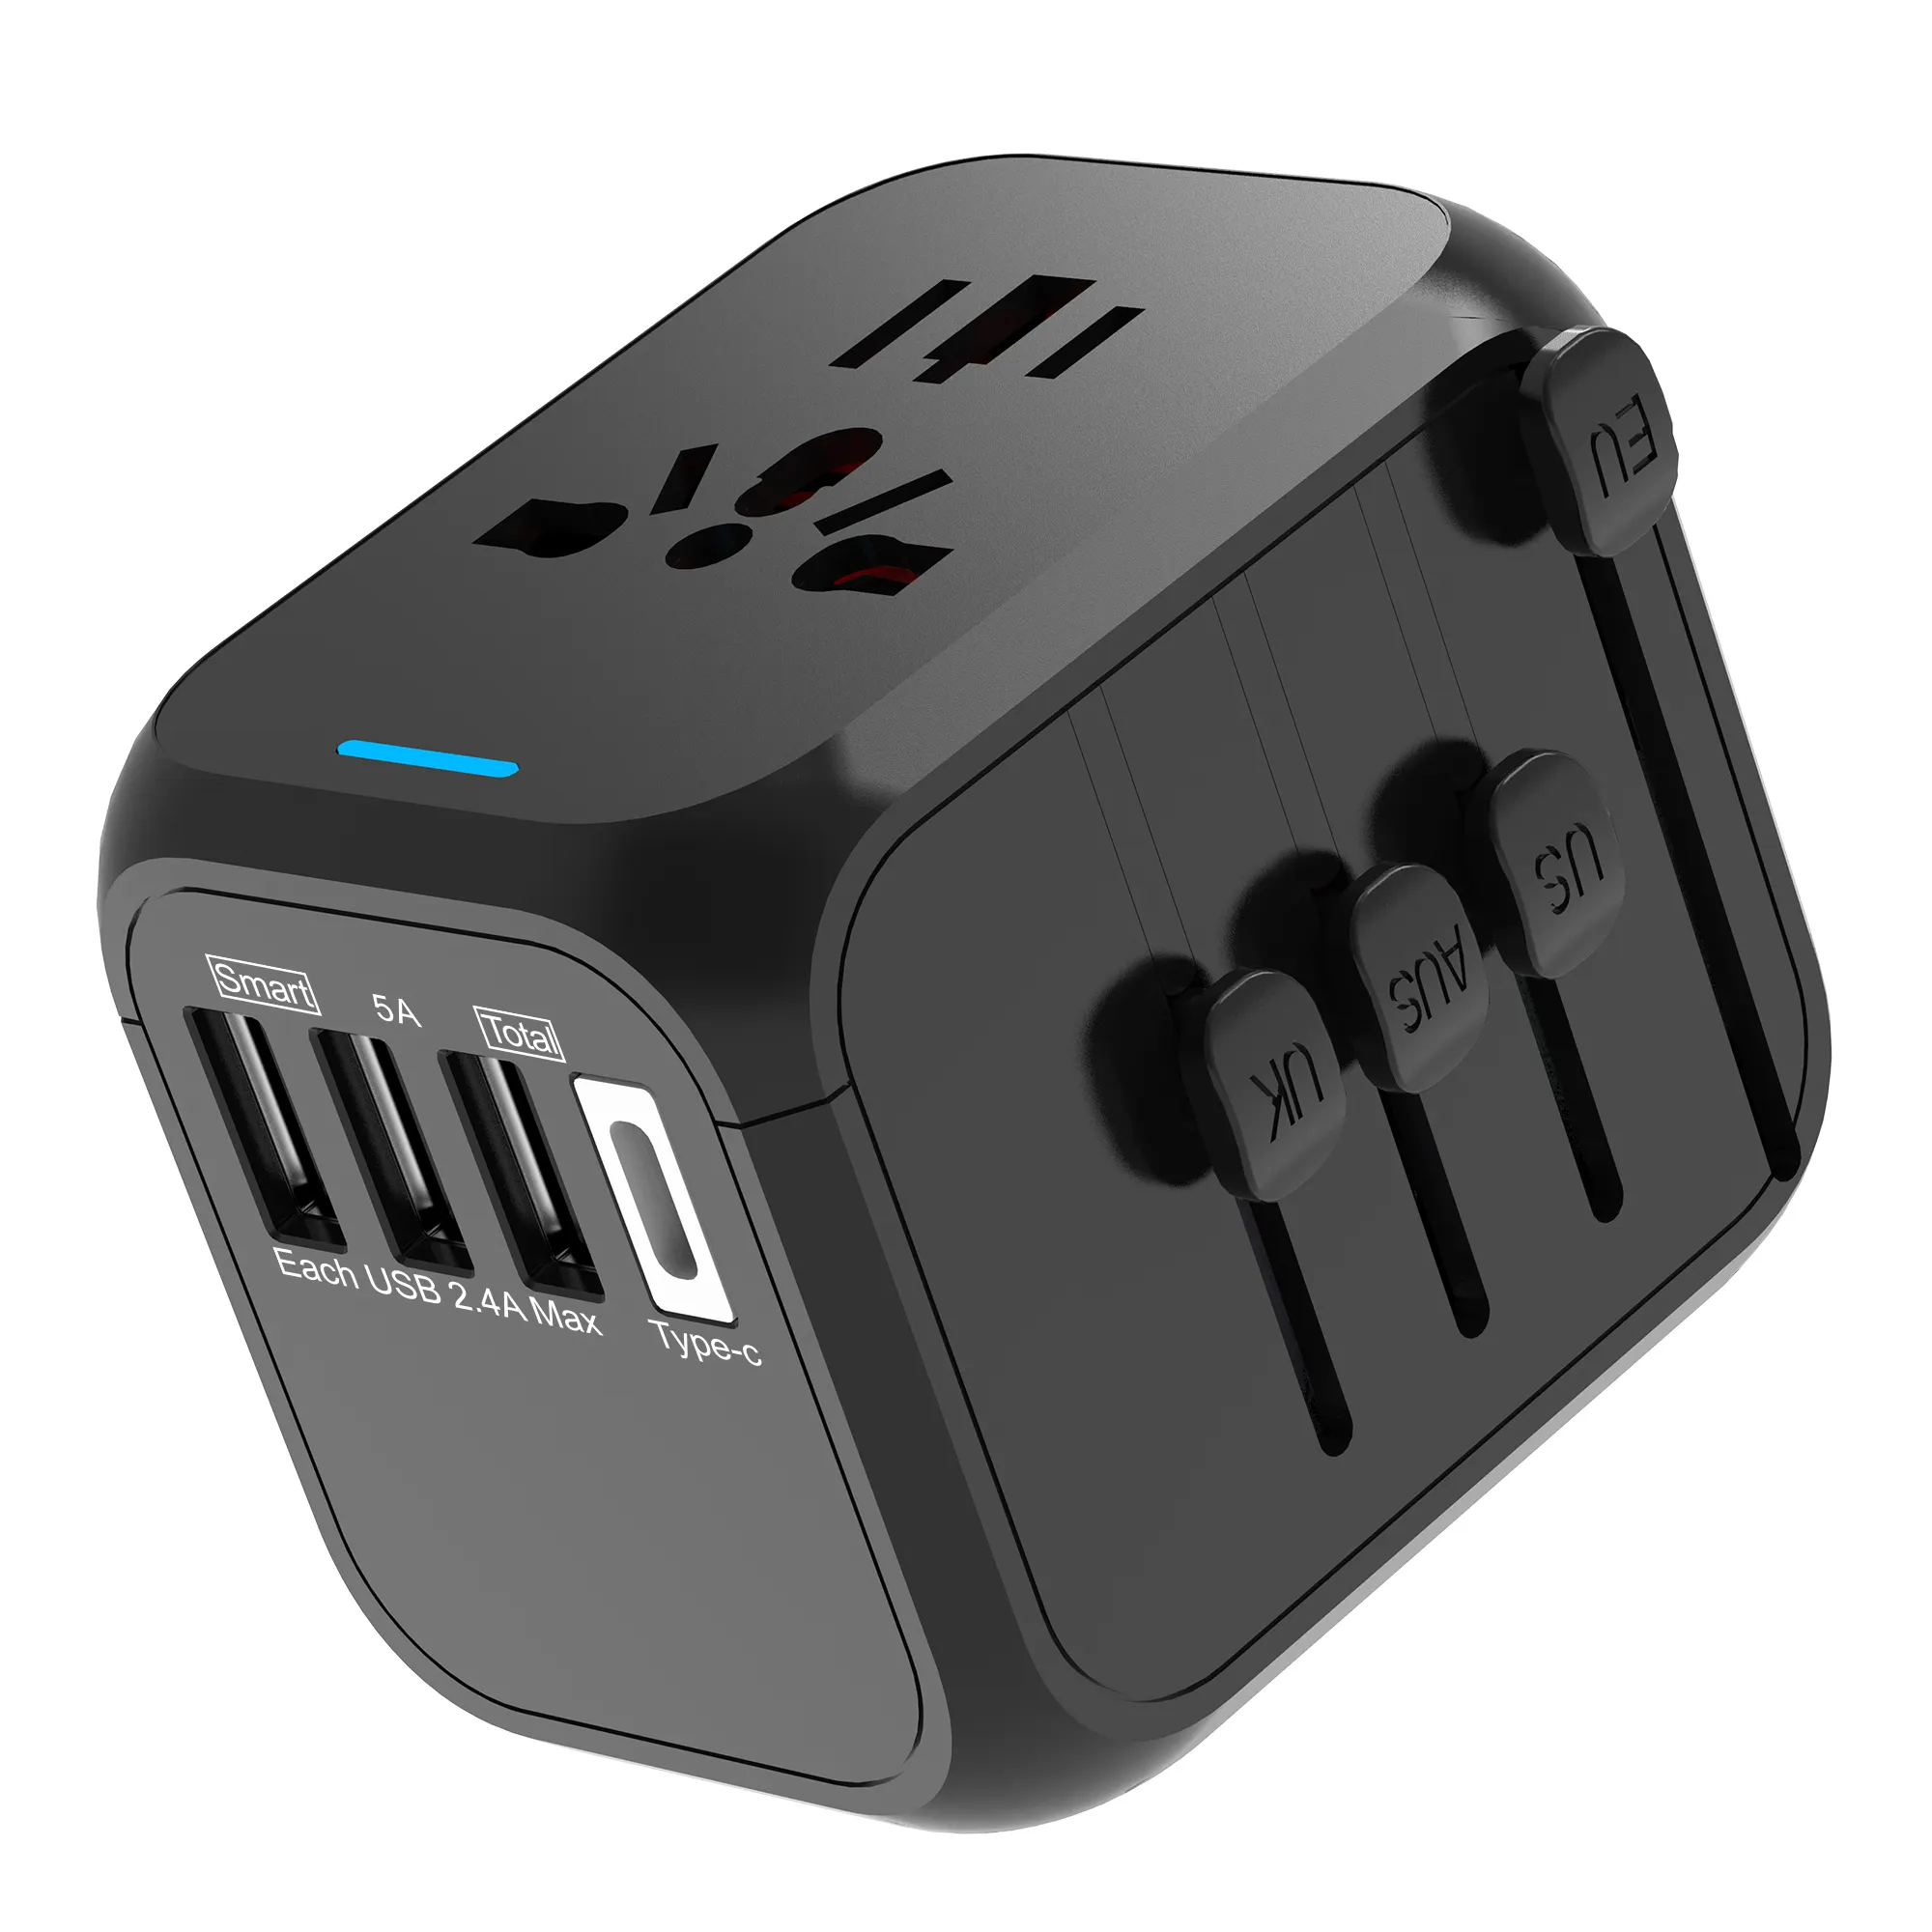 All in One Universal USB Travel Power Adapter With 3 USB Port And Type-C International Wall Charger Worldwide AC Power Plug